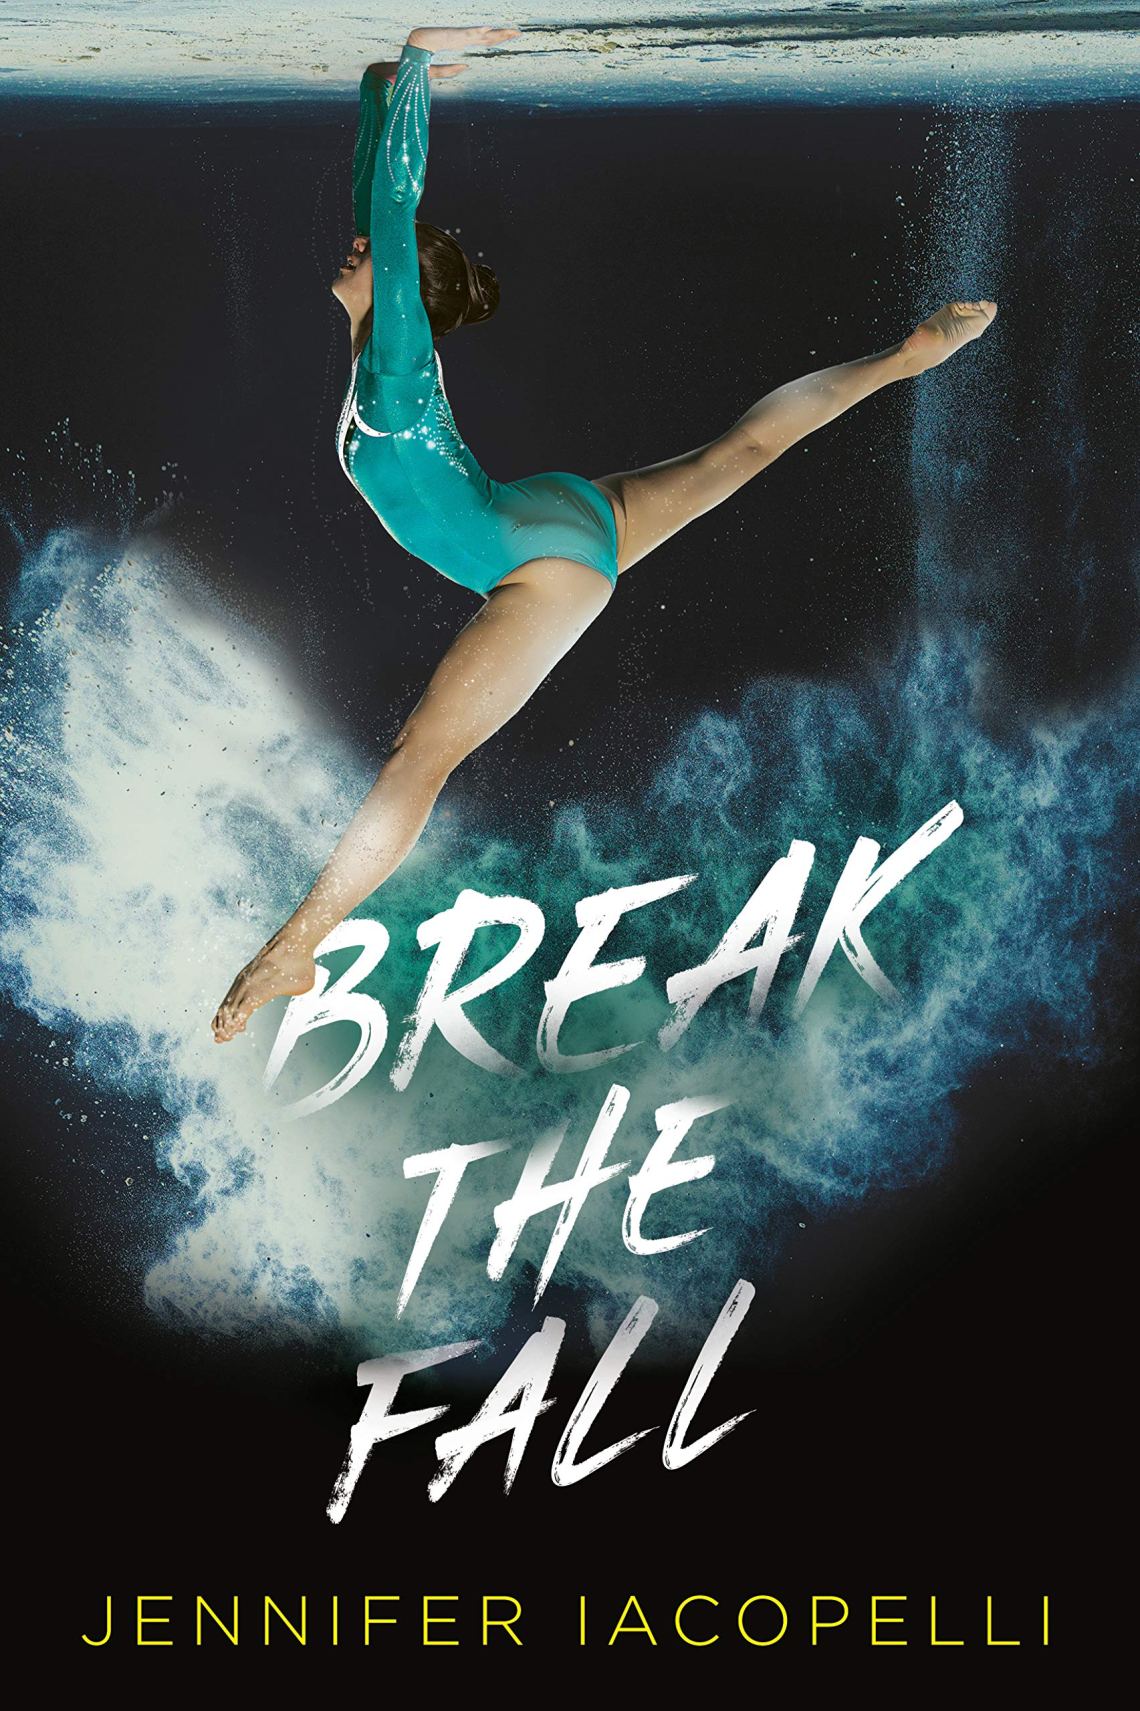 Book Cover for Break the Fall. The cover is a flipped photo of a gymnast vaulting on the ground. She is kicking up dust with her leg and is wearing a teal leotard. The background is black. 